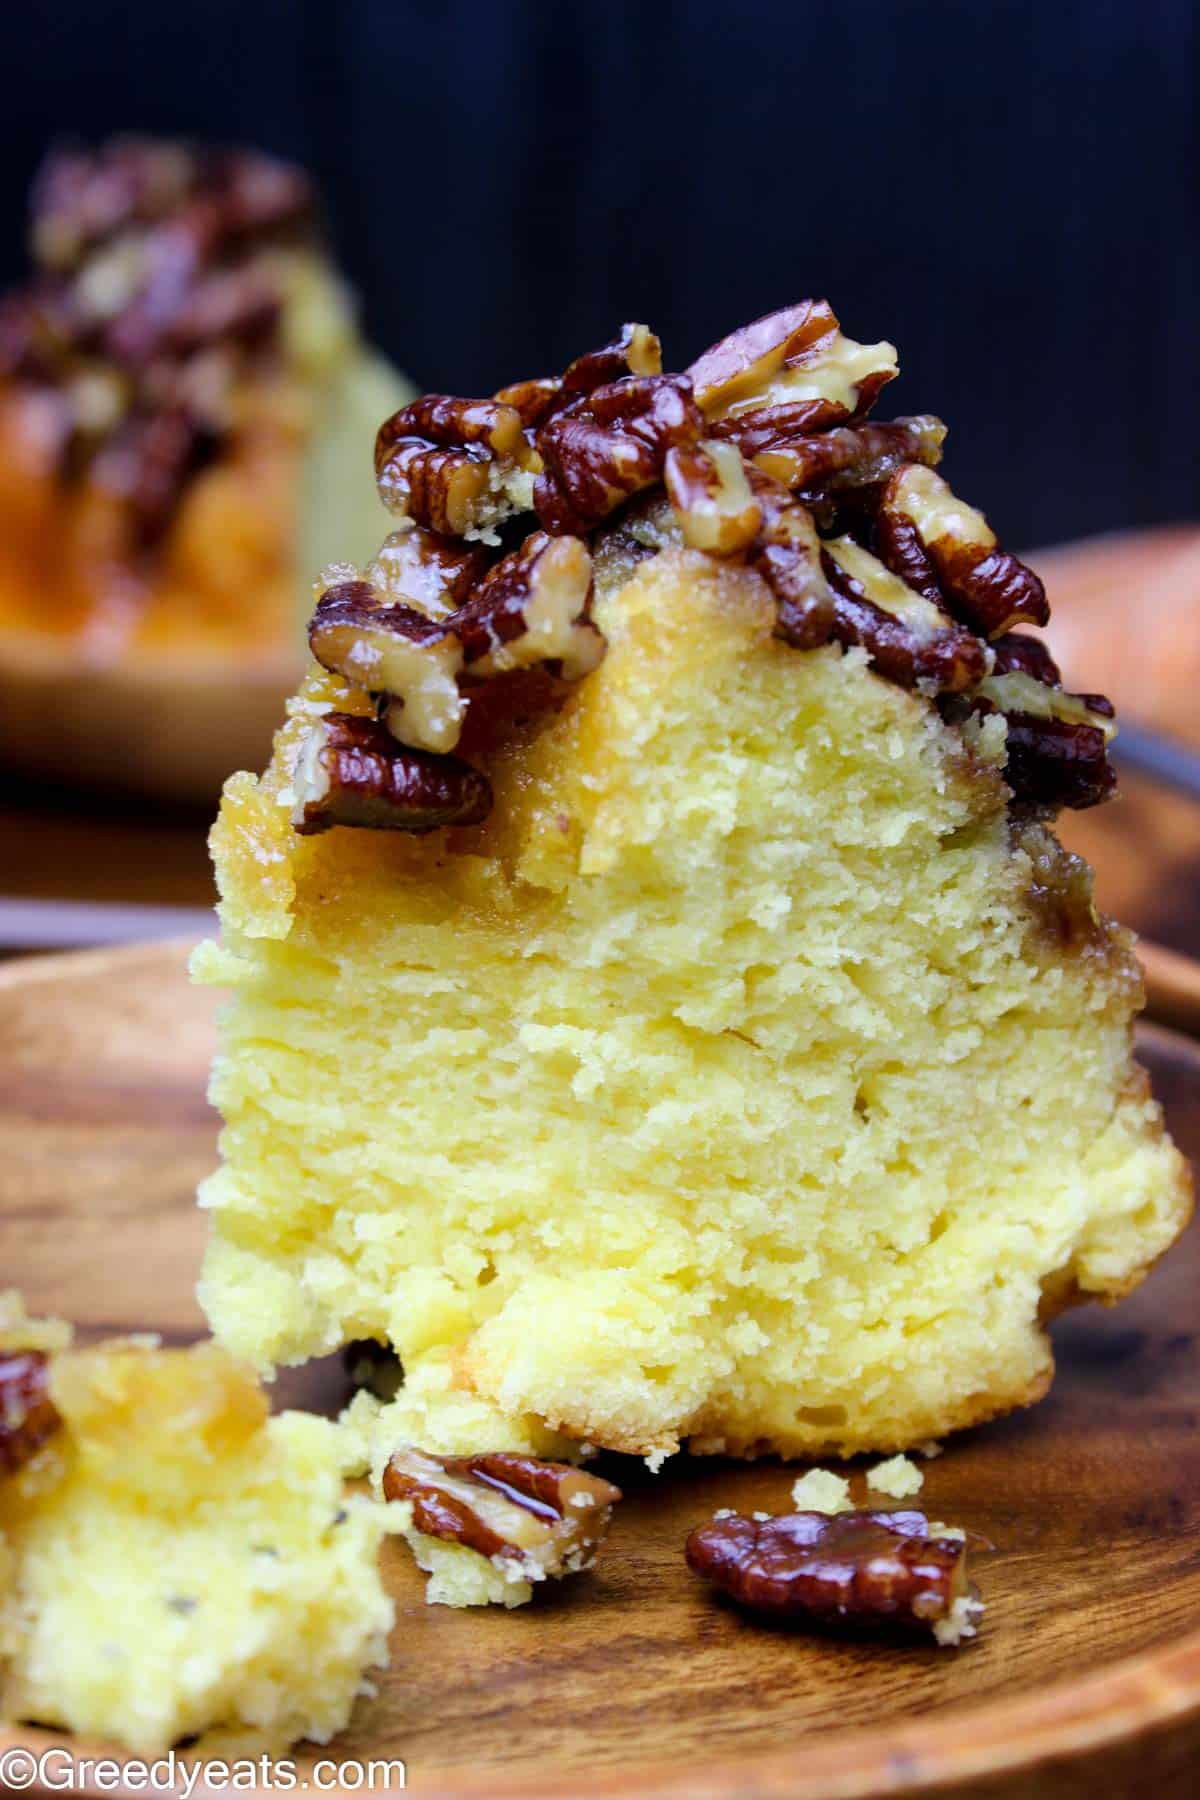 Buttery and moist Pound Cake made with reverse creaming method, flavored as Pecan cake.